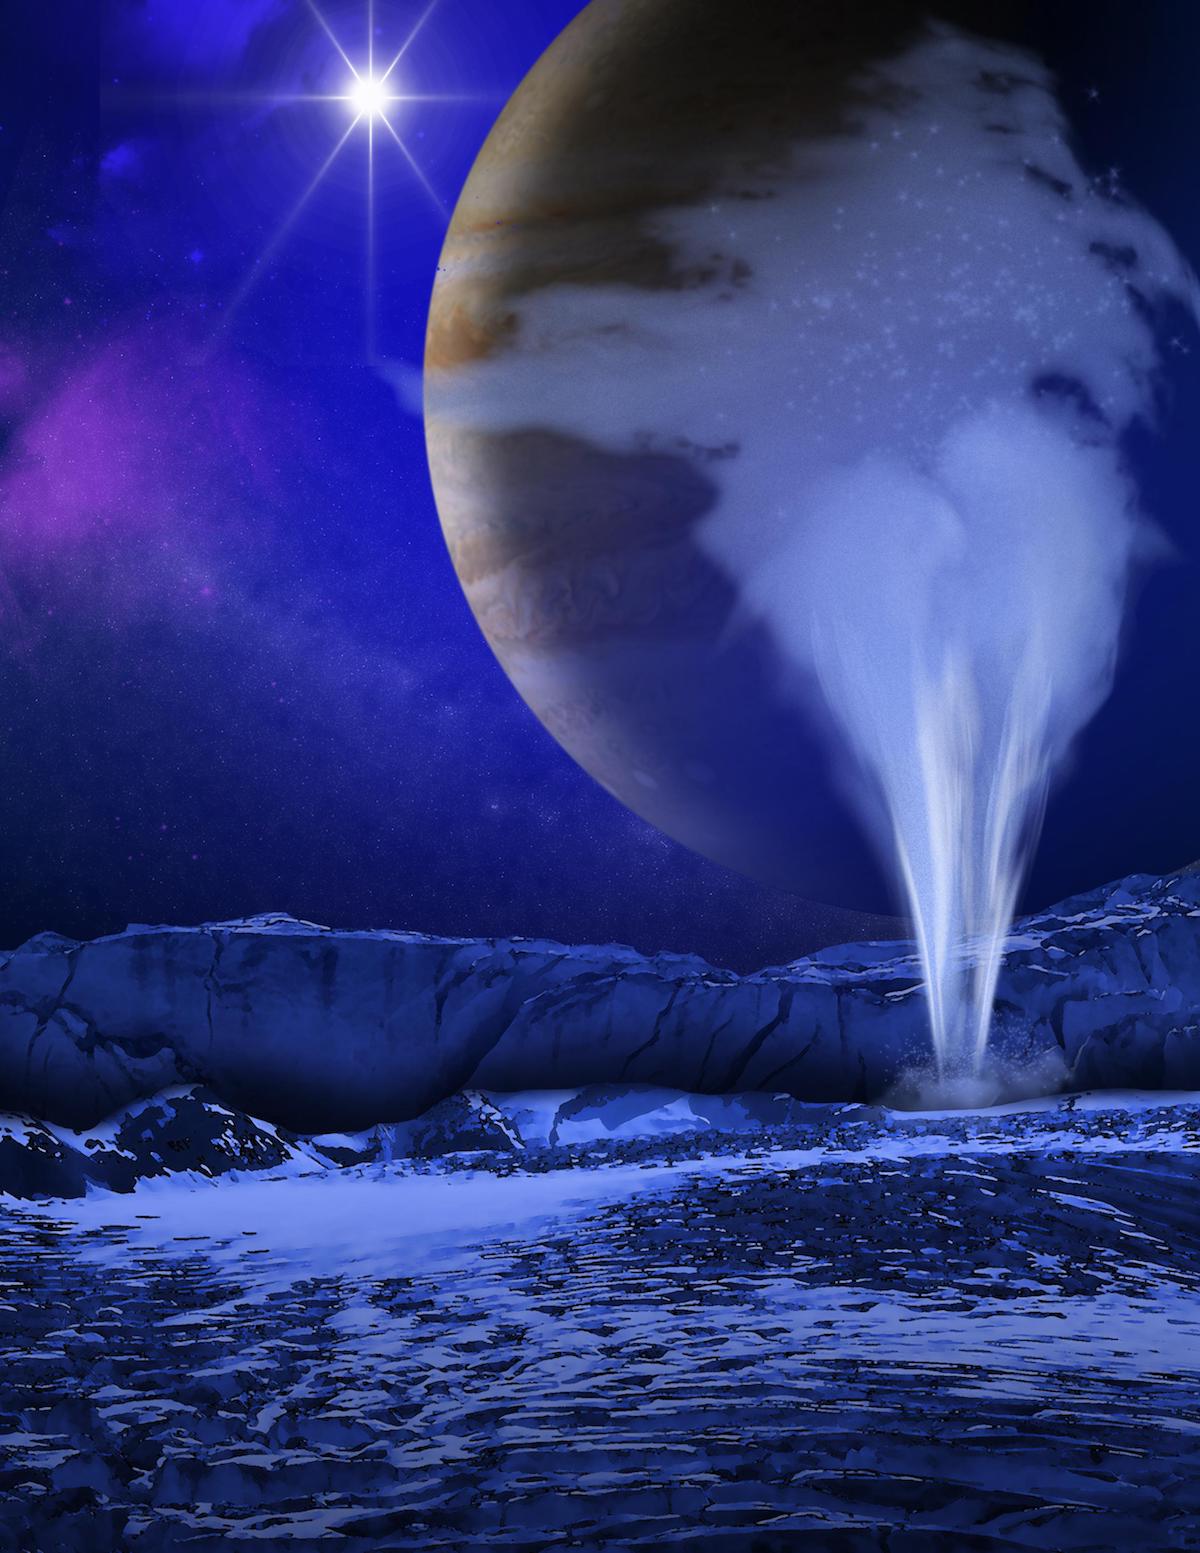 This is an artist's concept of a plume of water vapor thought to be ejected off the frigid, icy surface of the Jovian moon Europa, located about 500 million miles (800 million kilometers) from the sun.